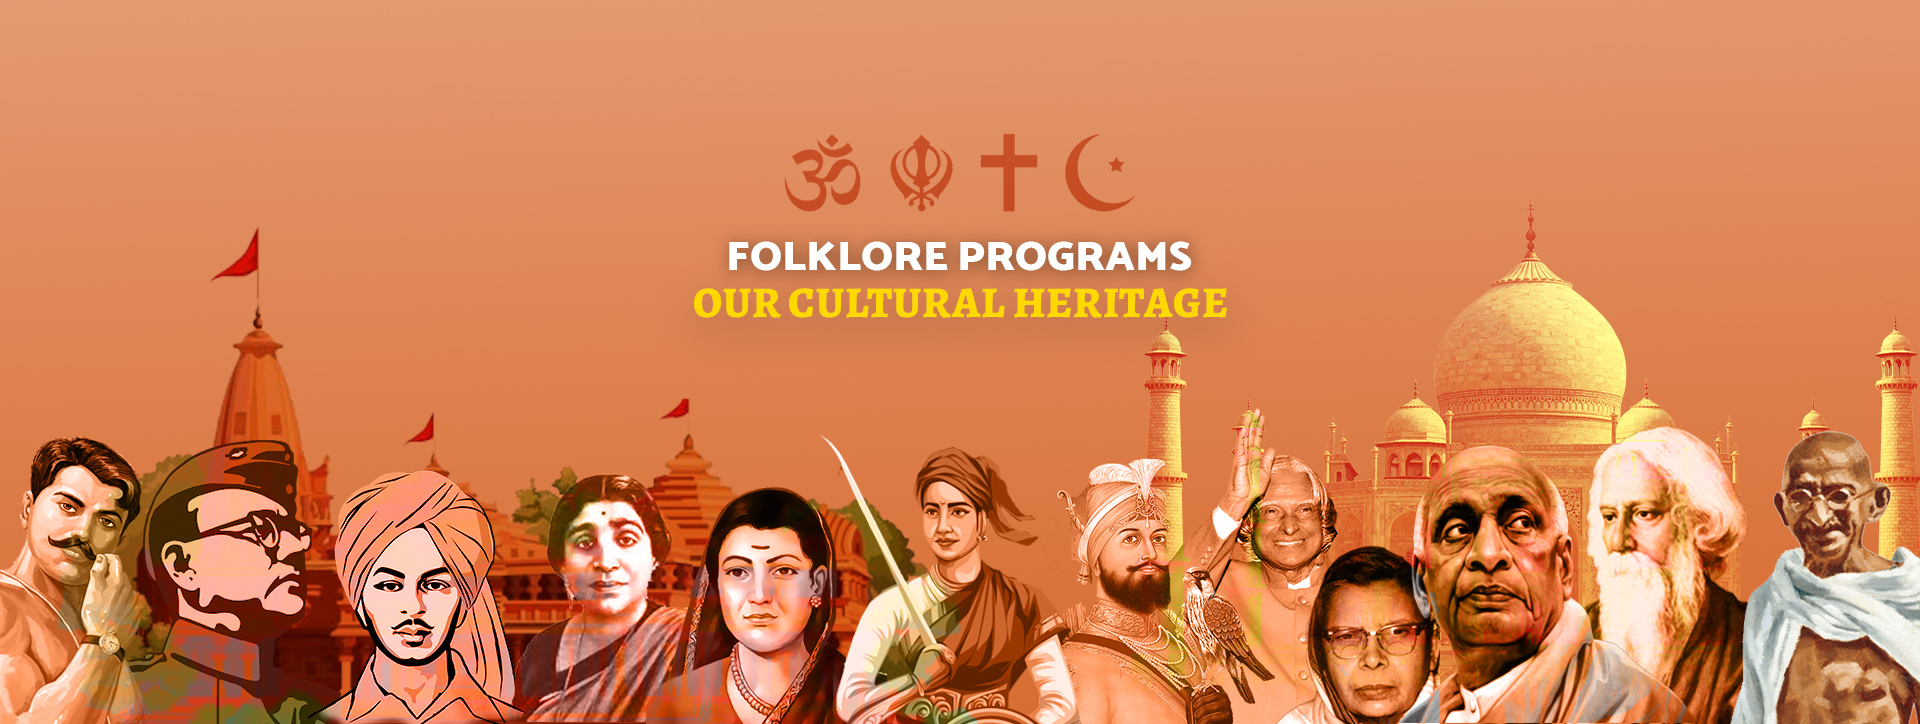 Folklore Programs Our cultural heritage